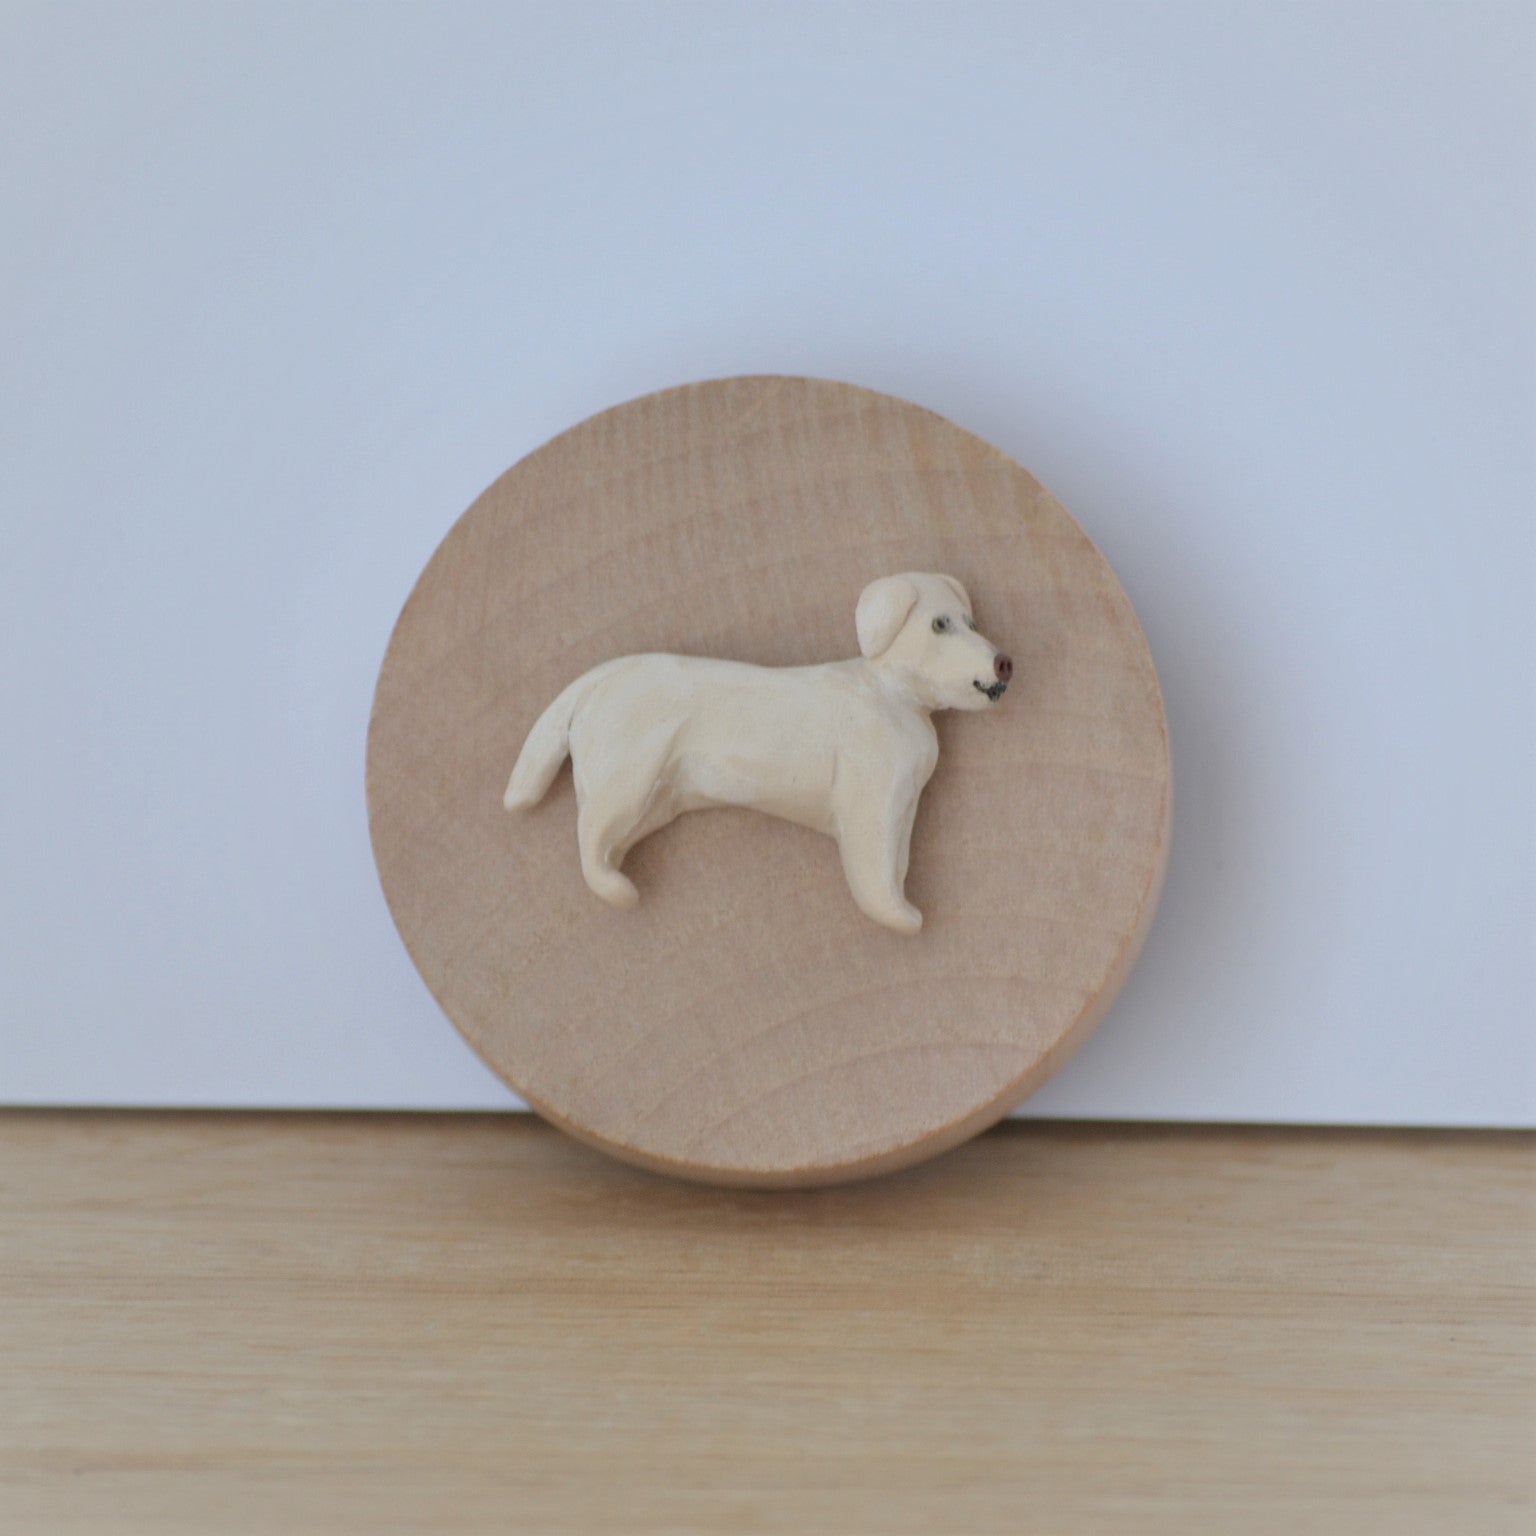 Timber bottle opener with handmade clay yellow lab sculpture attached